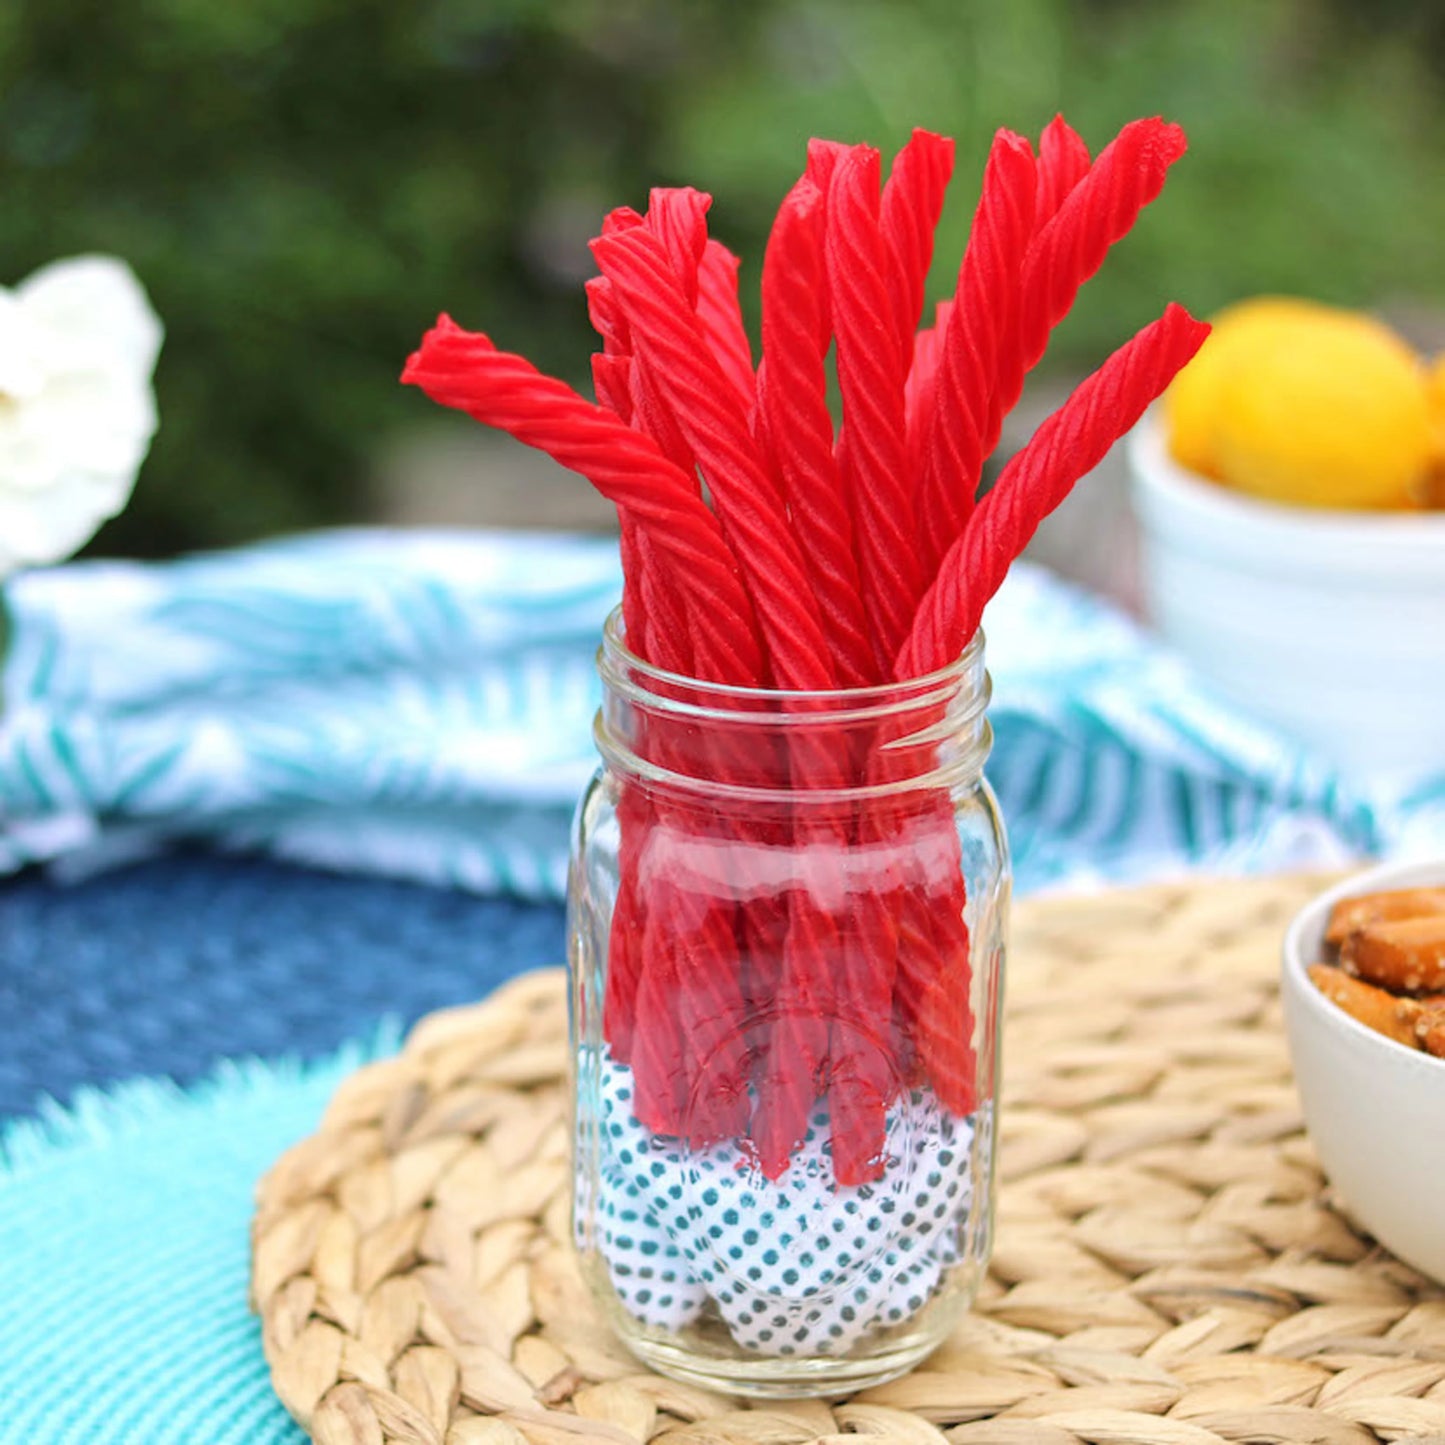 Red Vines Original Red Licorice Twists in a jar near other poolside snacks